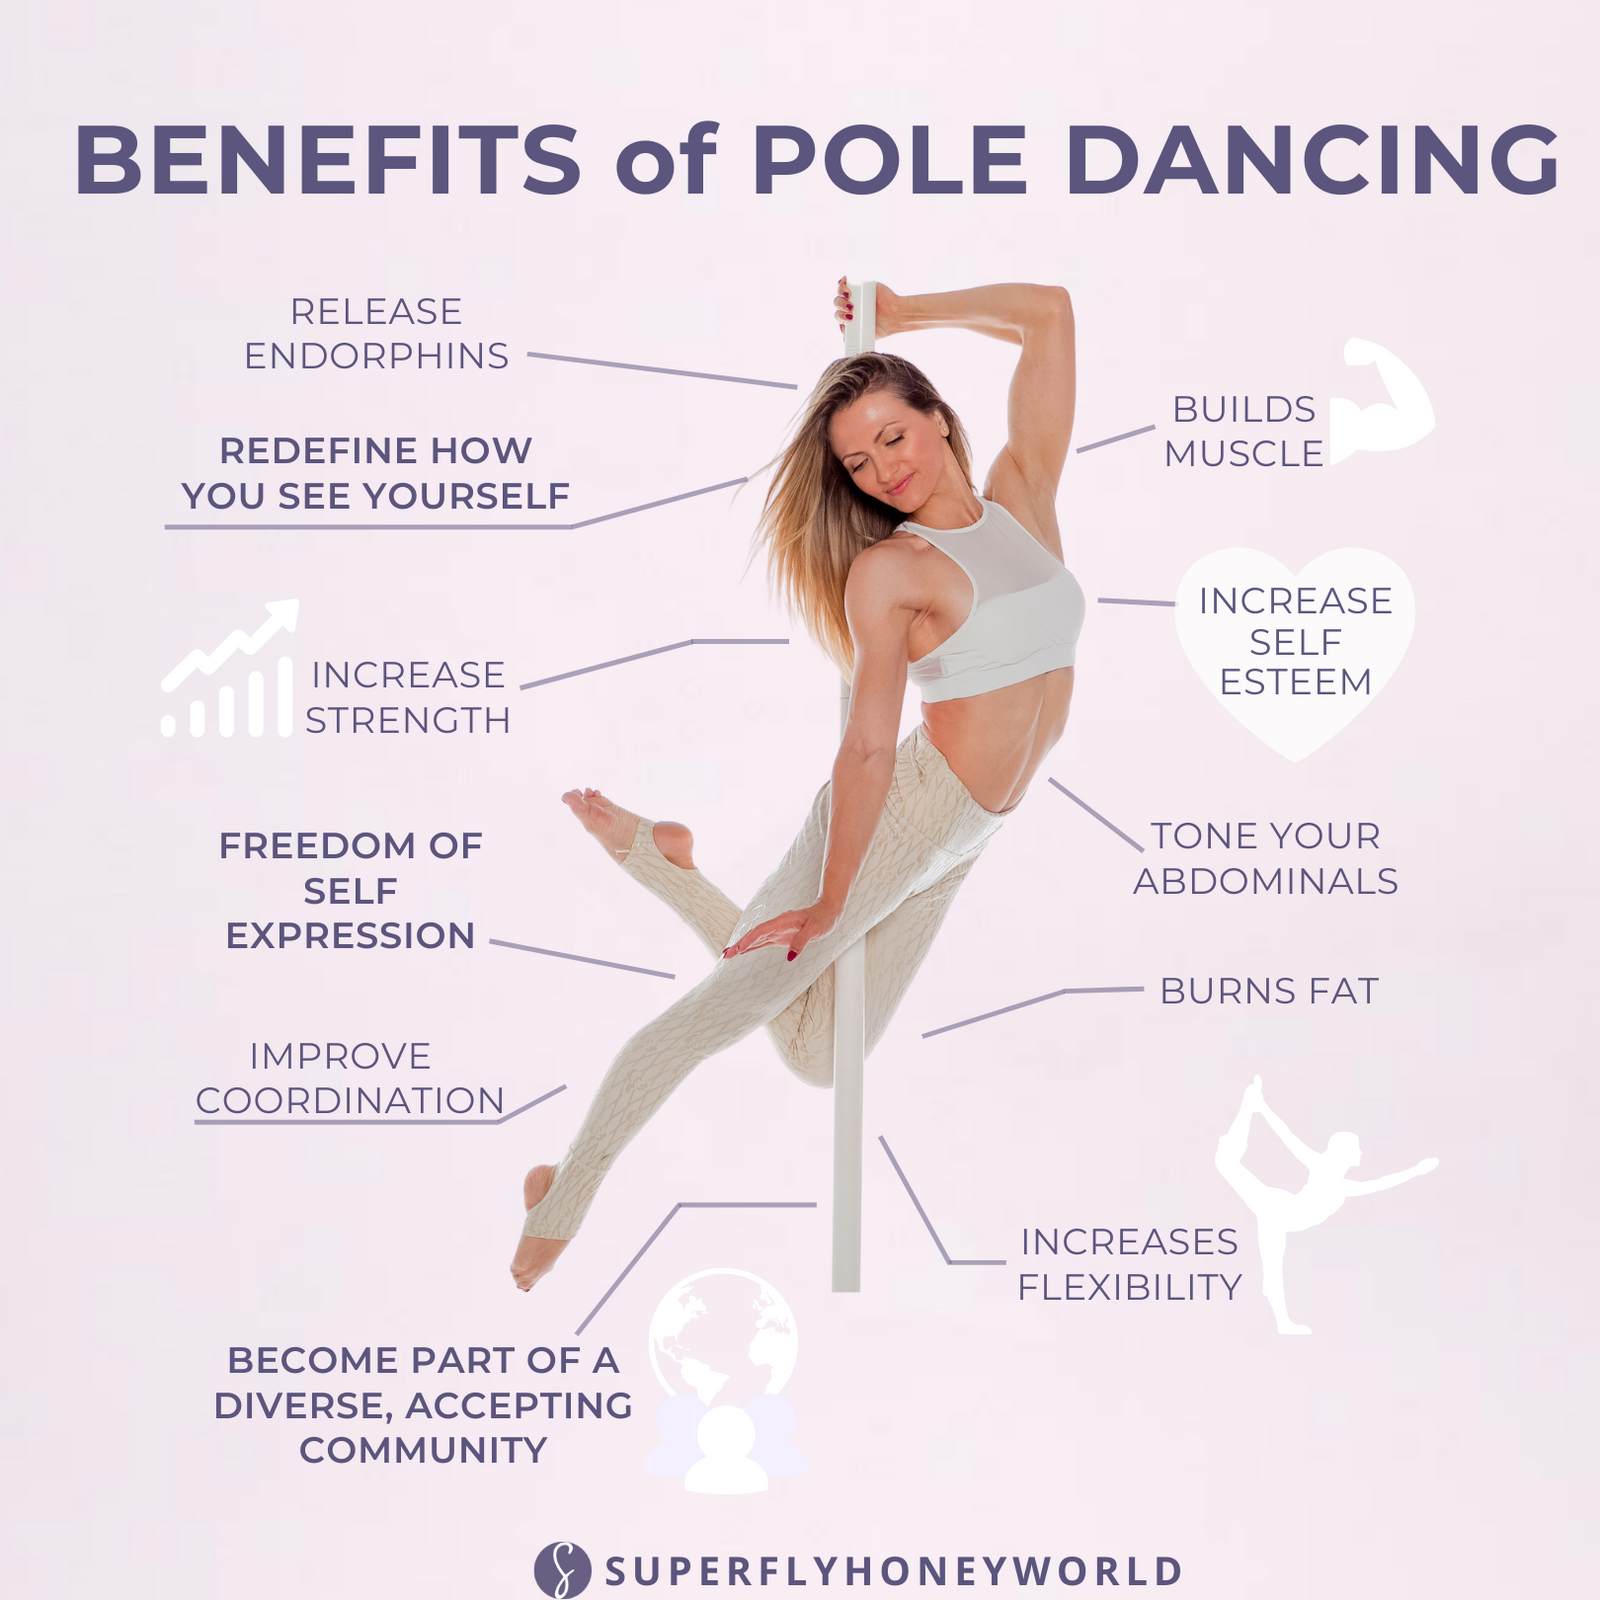 Is pole dancing a sport, performance, dance or workout?